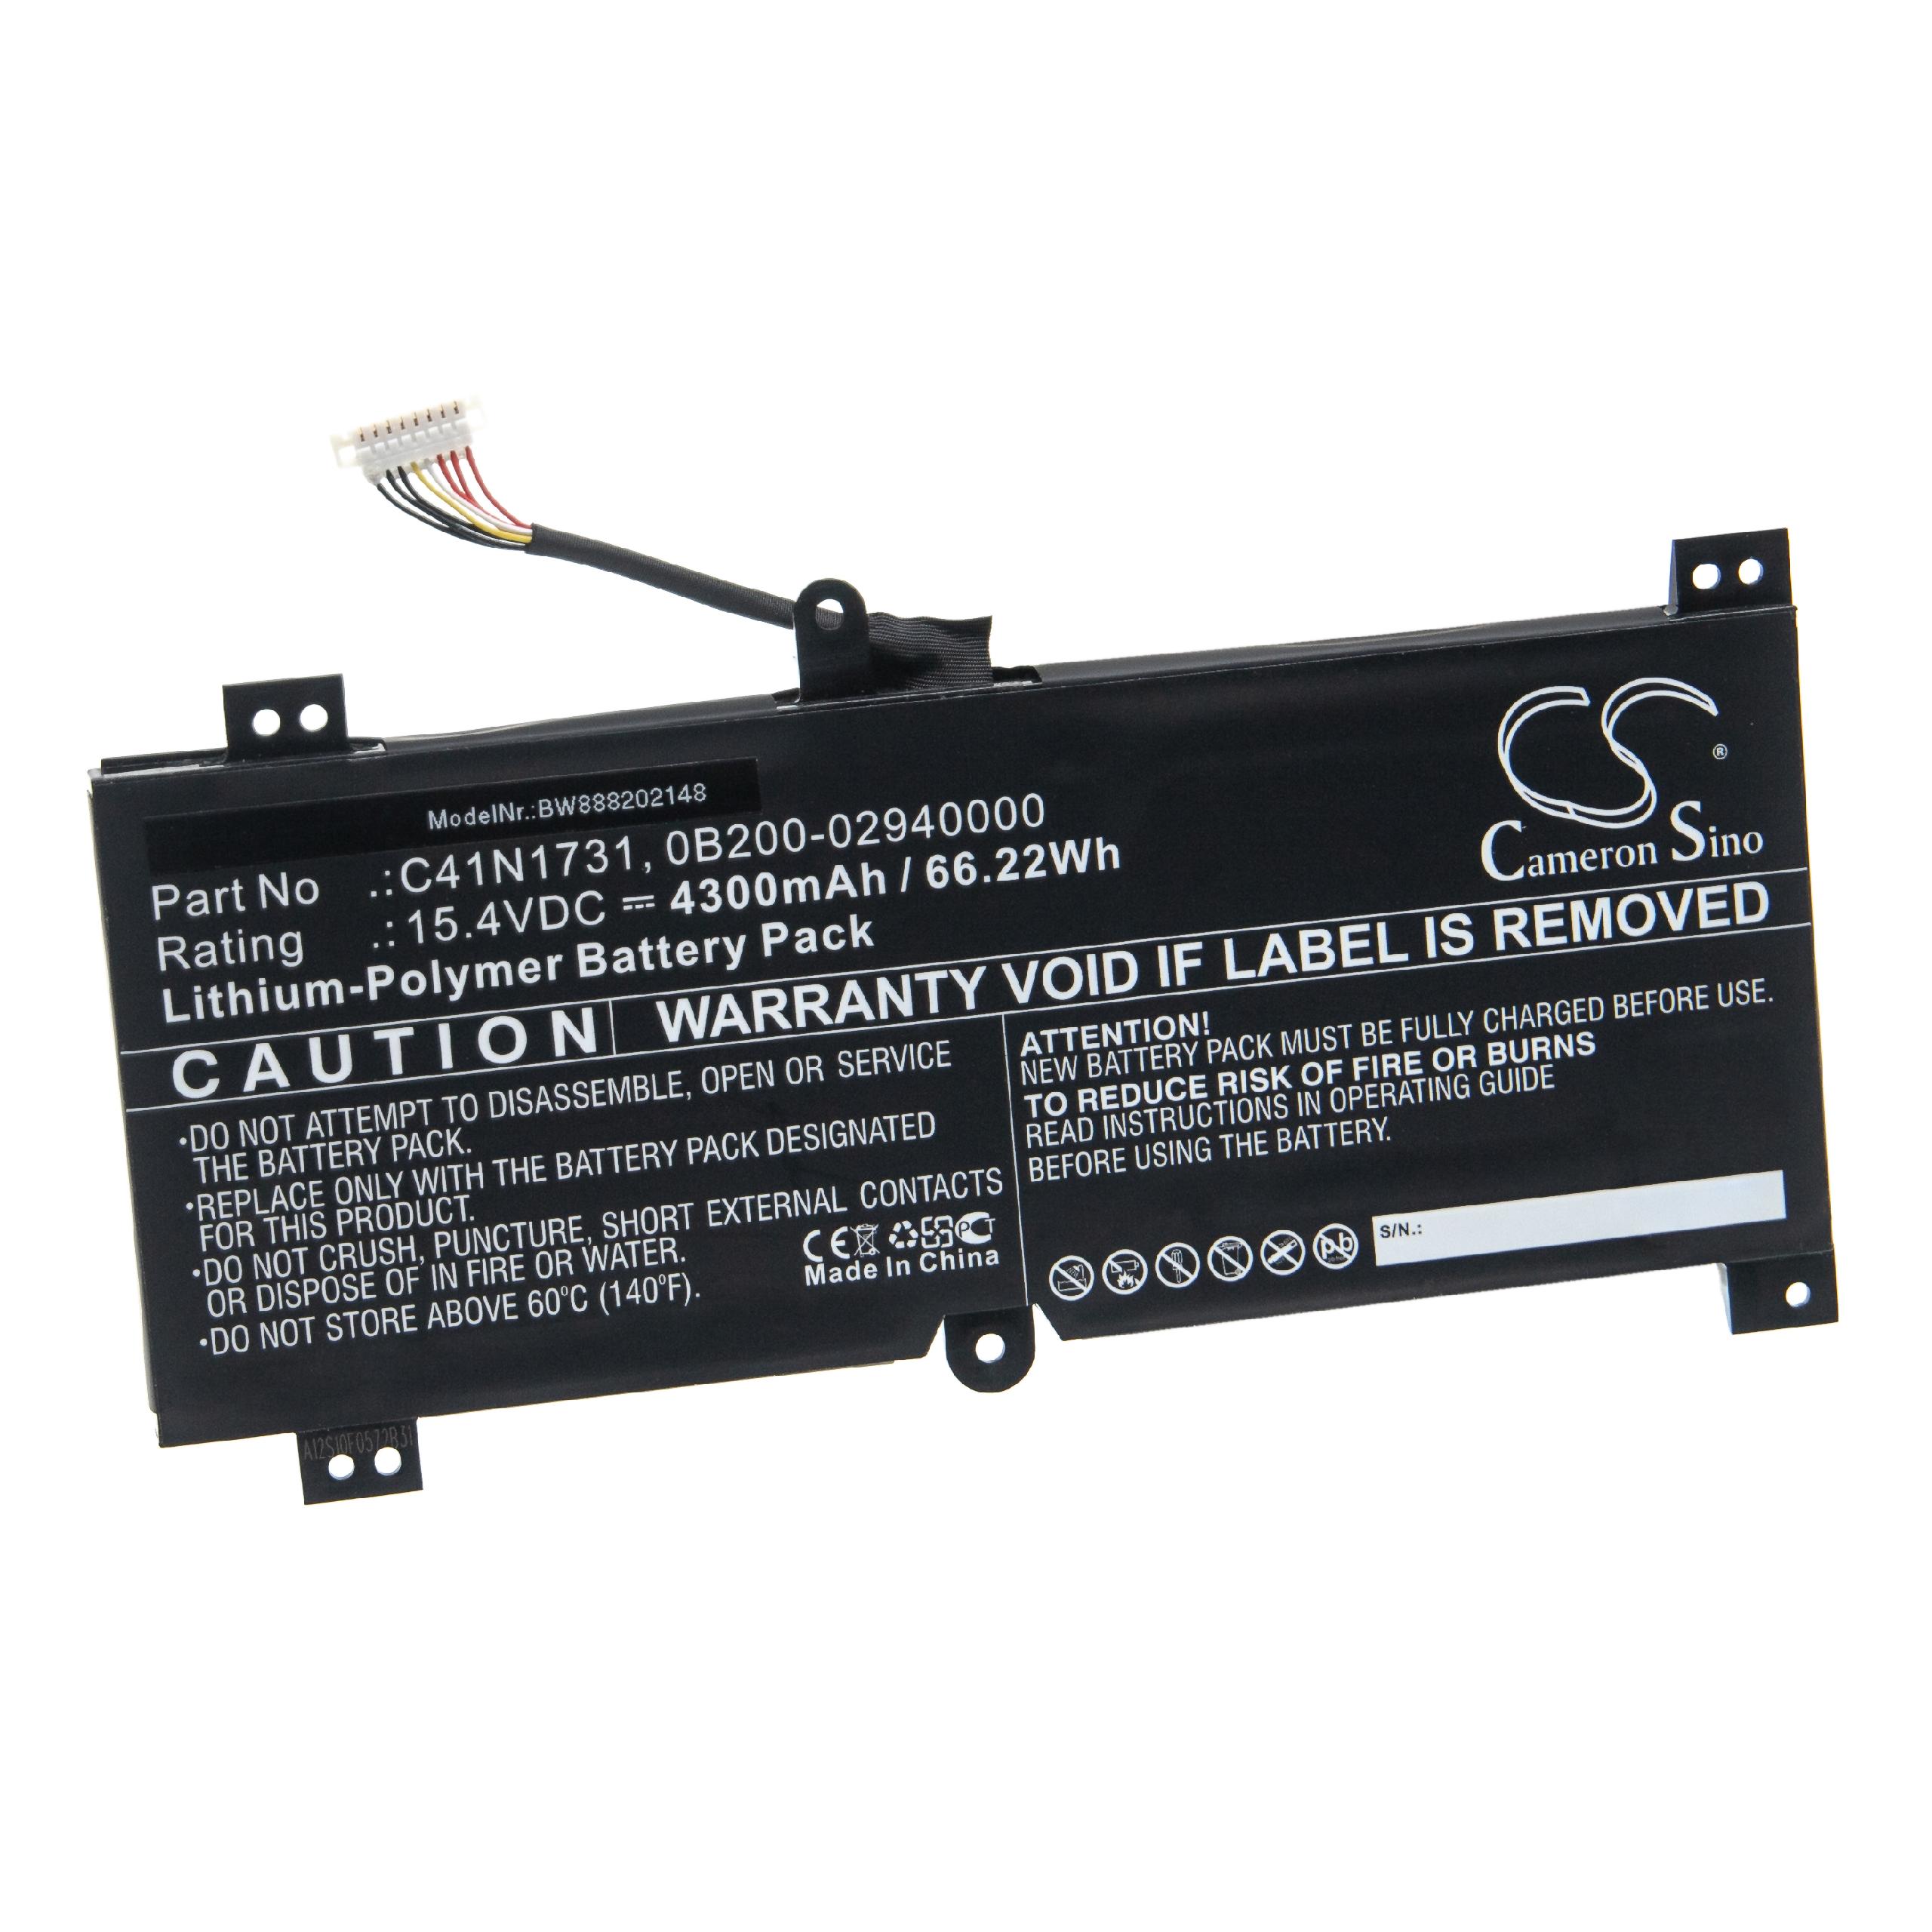 Notebook Battery Replacement for Asus C41N1731, 0B200-02940000 - 4300mAh 15.4V Li-polymer